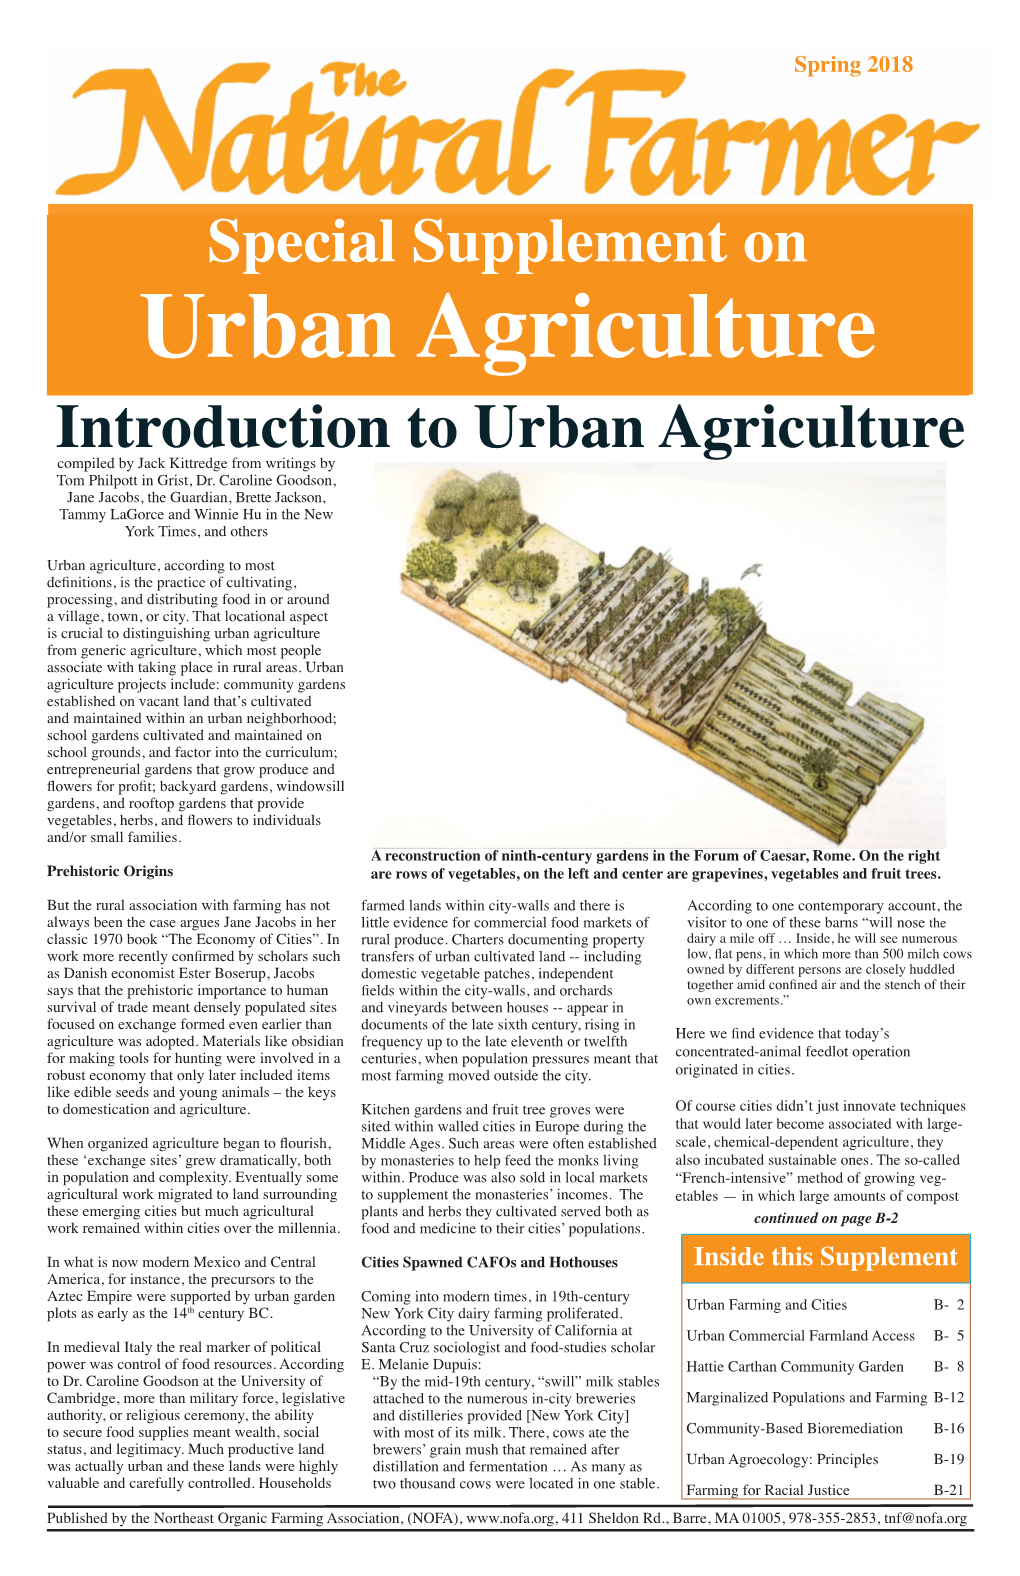 Special Supplement on Introduction to Urban Agriculture